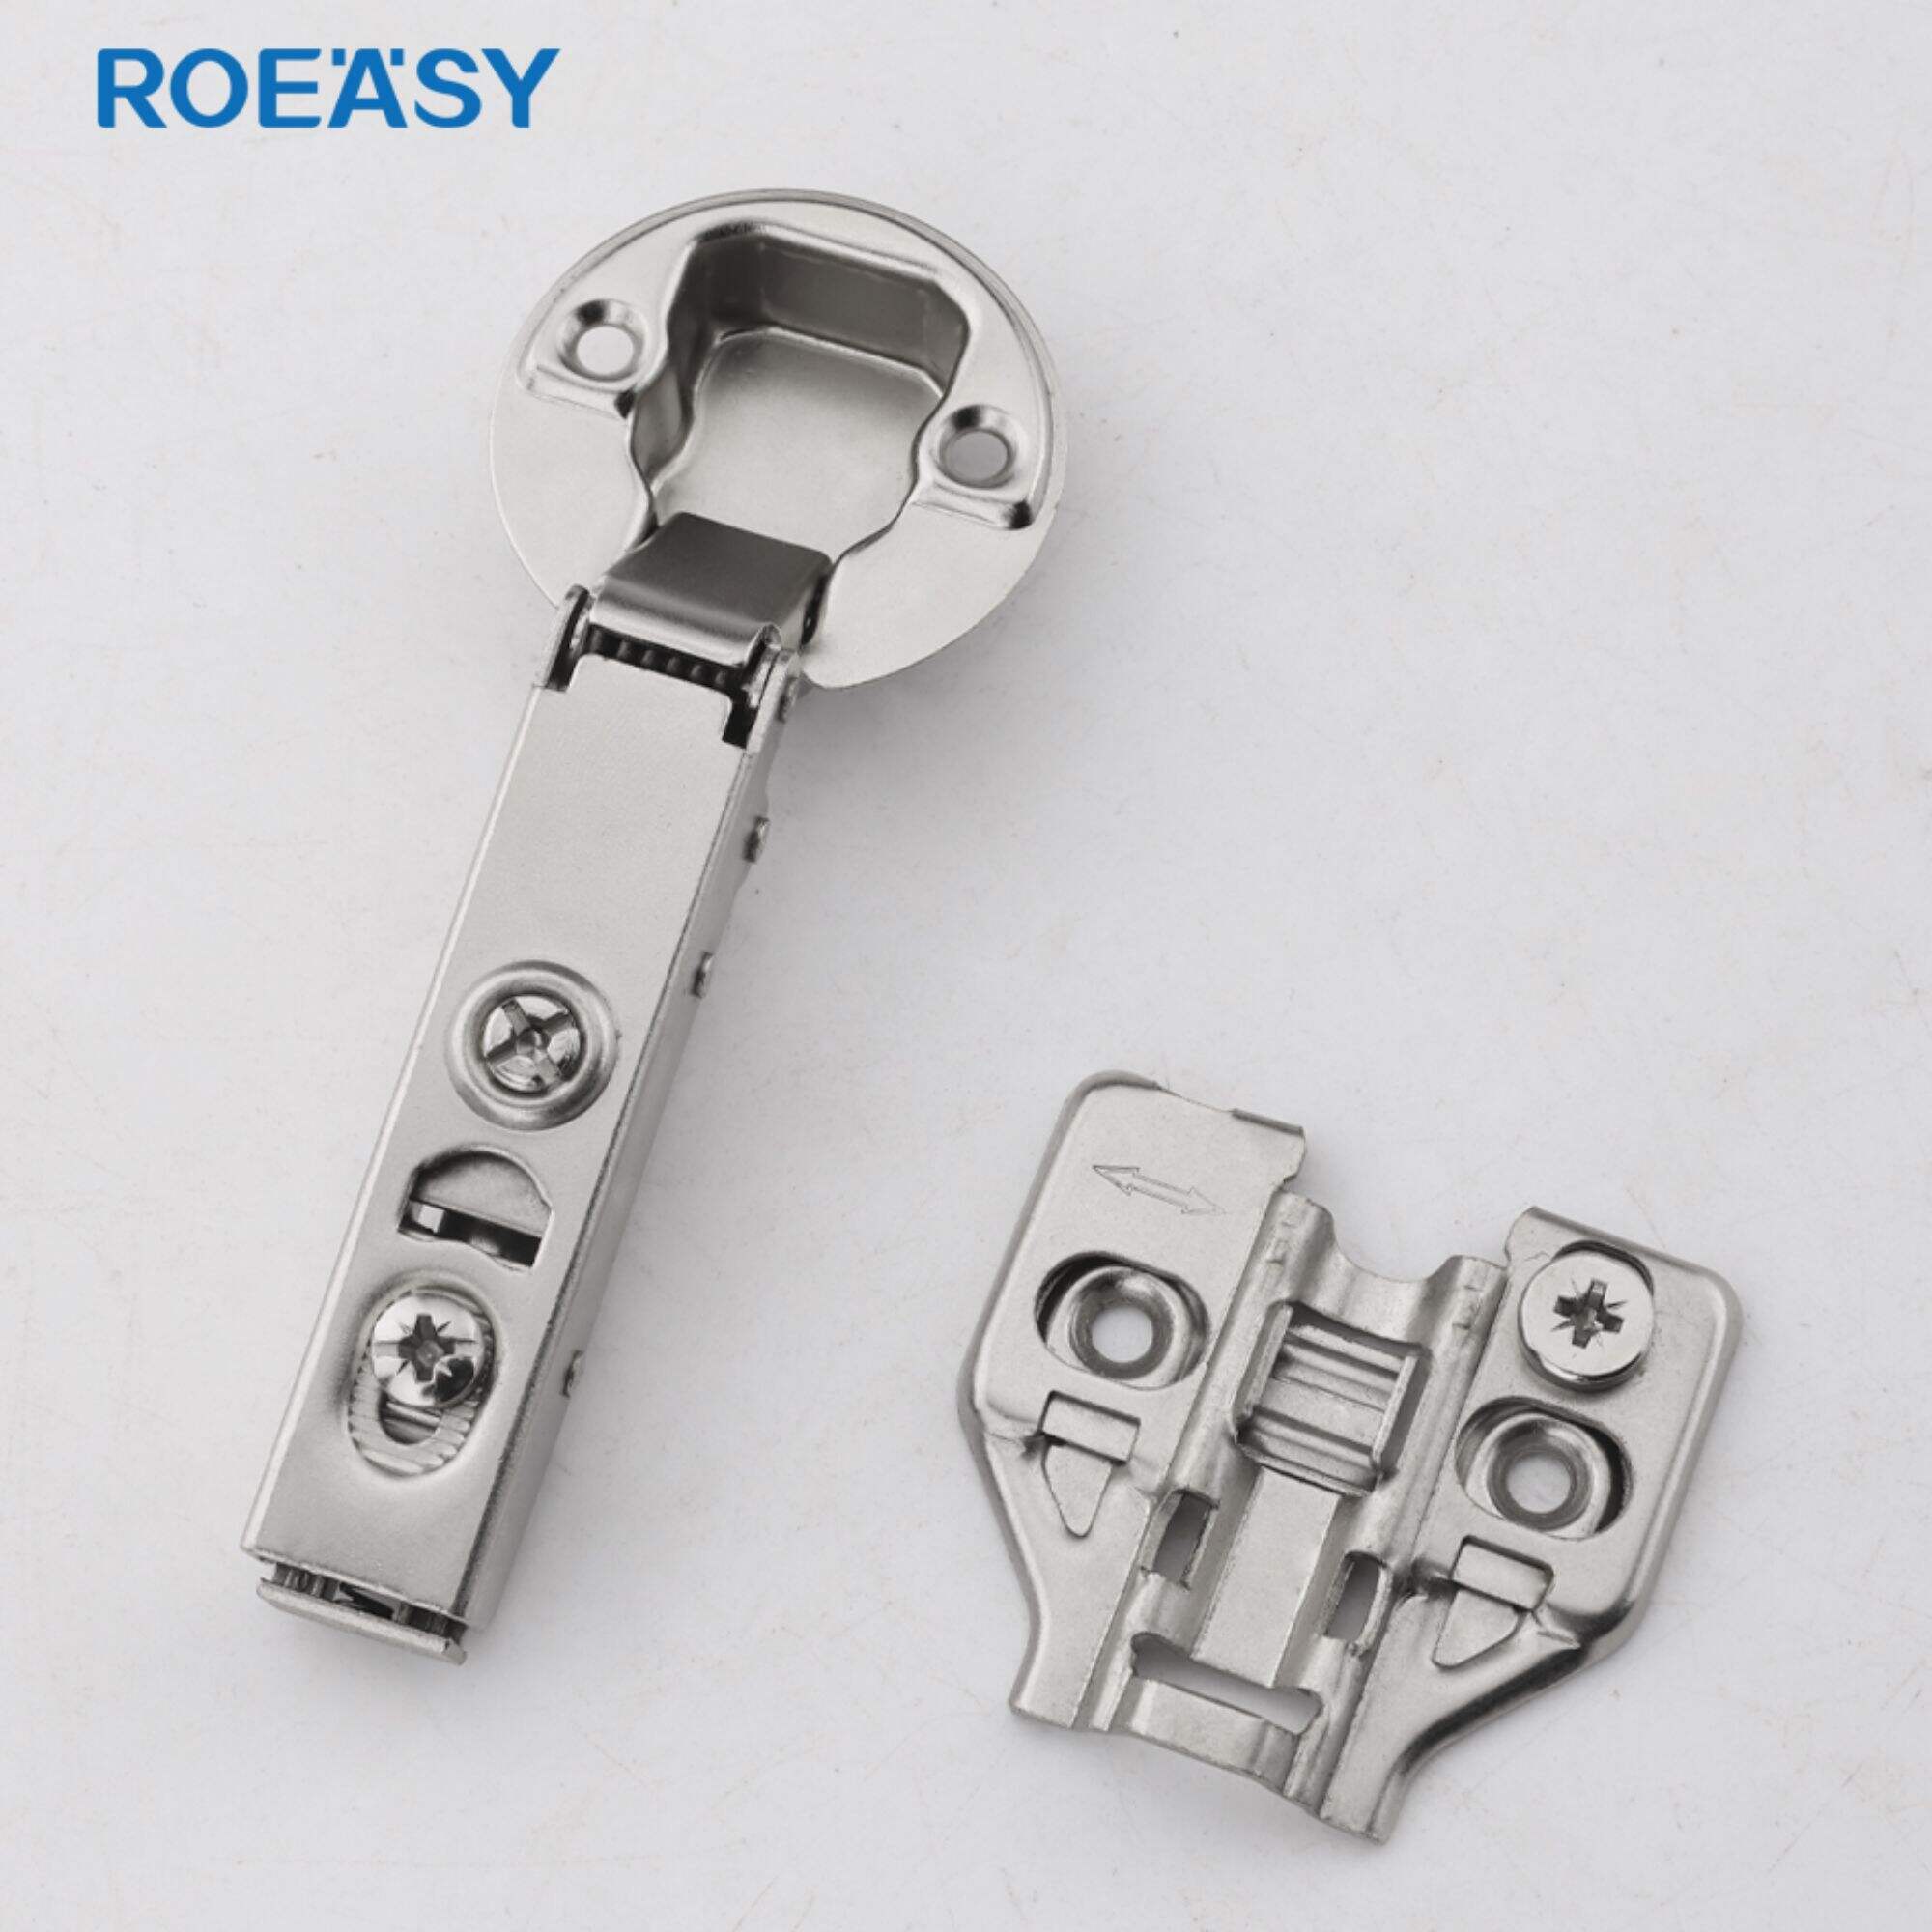 Roeasy Soft Close 3D Adjustable Hinge 35mm Round Cup Glass Cabinet Door Hinge for Glass Display Cupboard Hinge